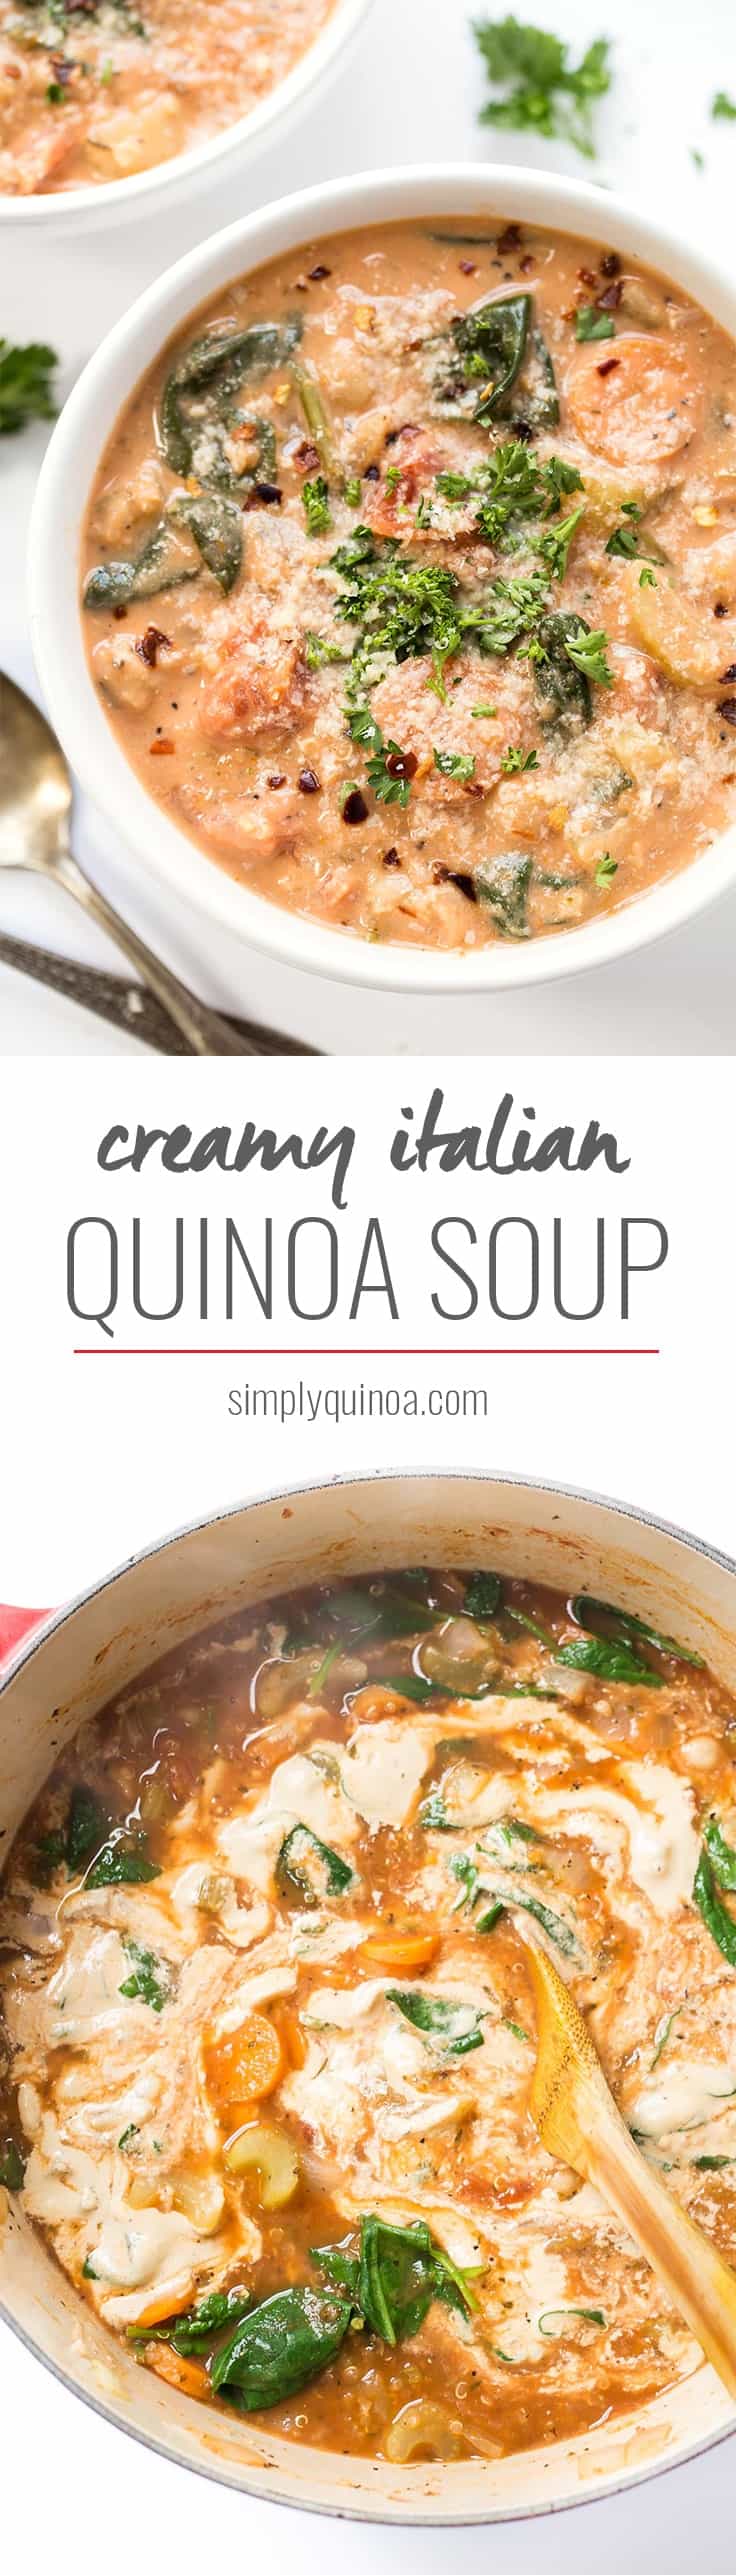 This CREAMY Italian Quinoa Soup is thick, hearty and made without any actual cream! [vegan]